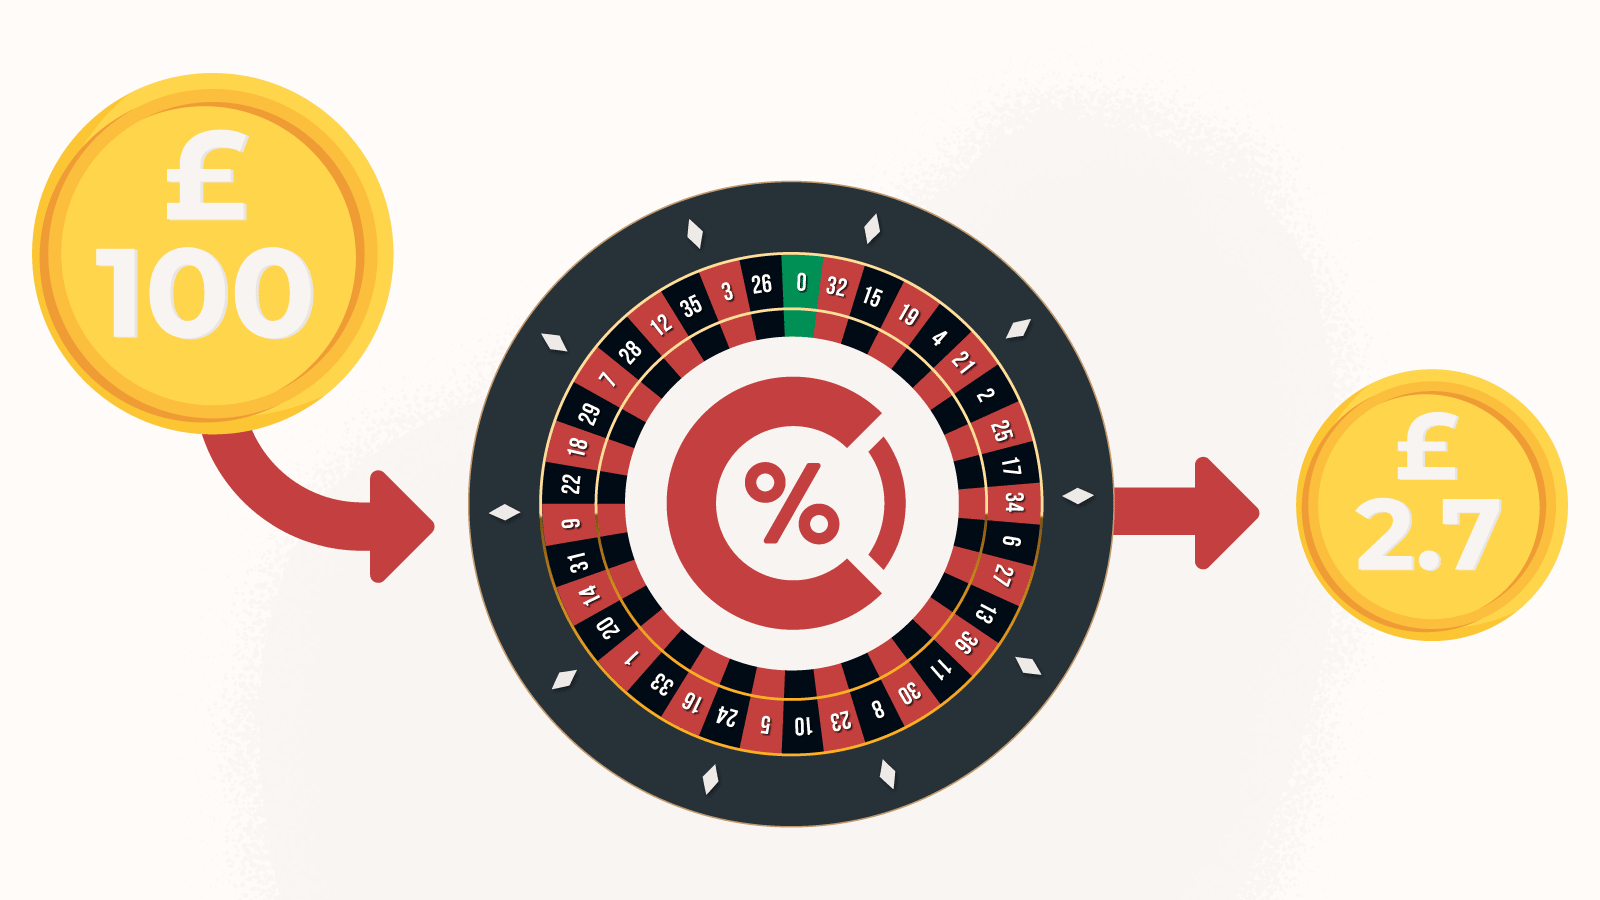 How to Assess the House Edge on Casino Games